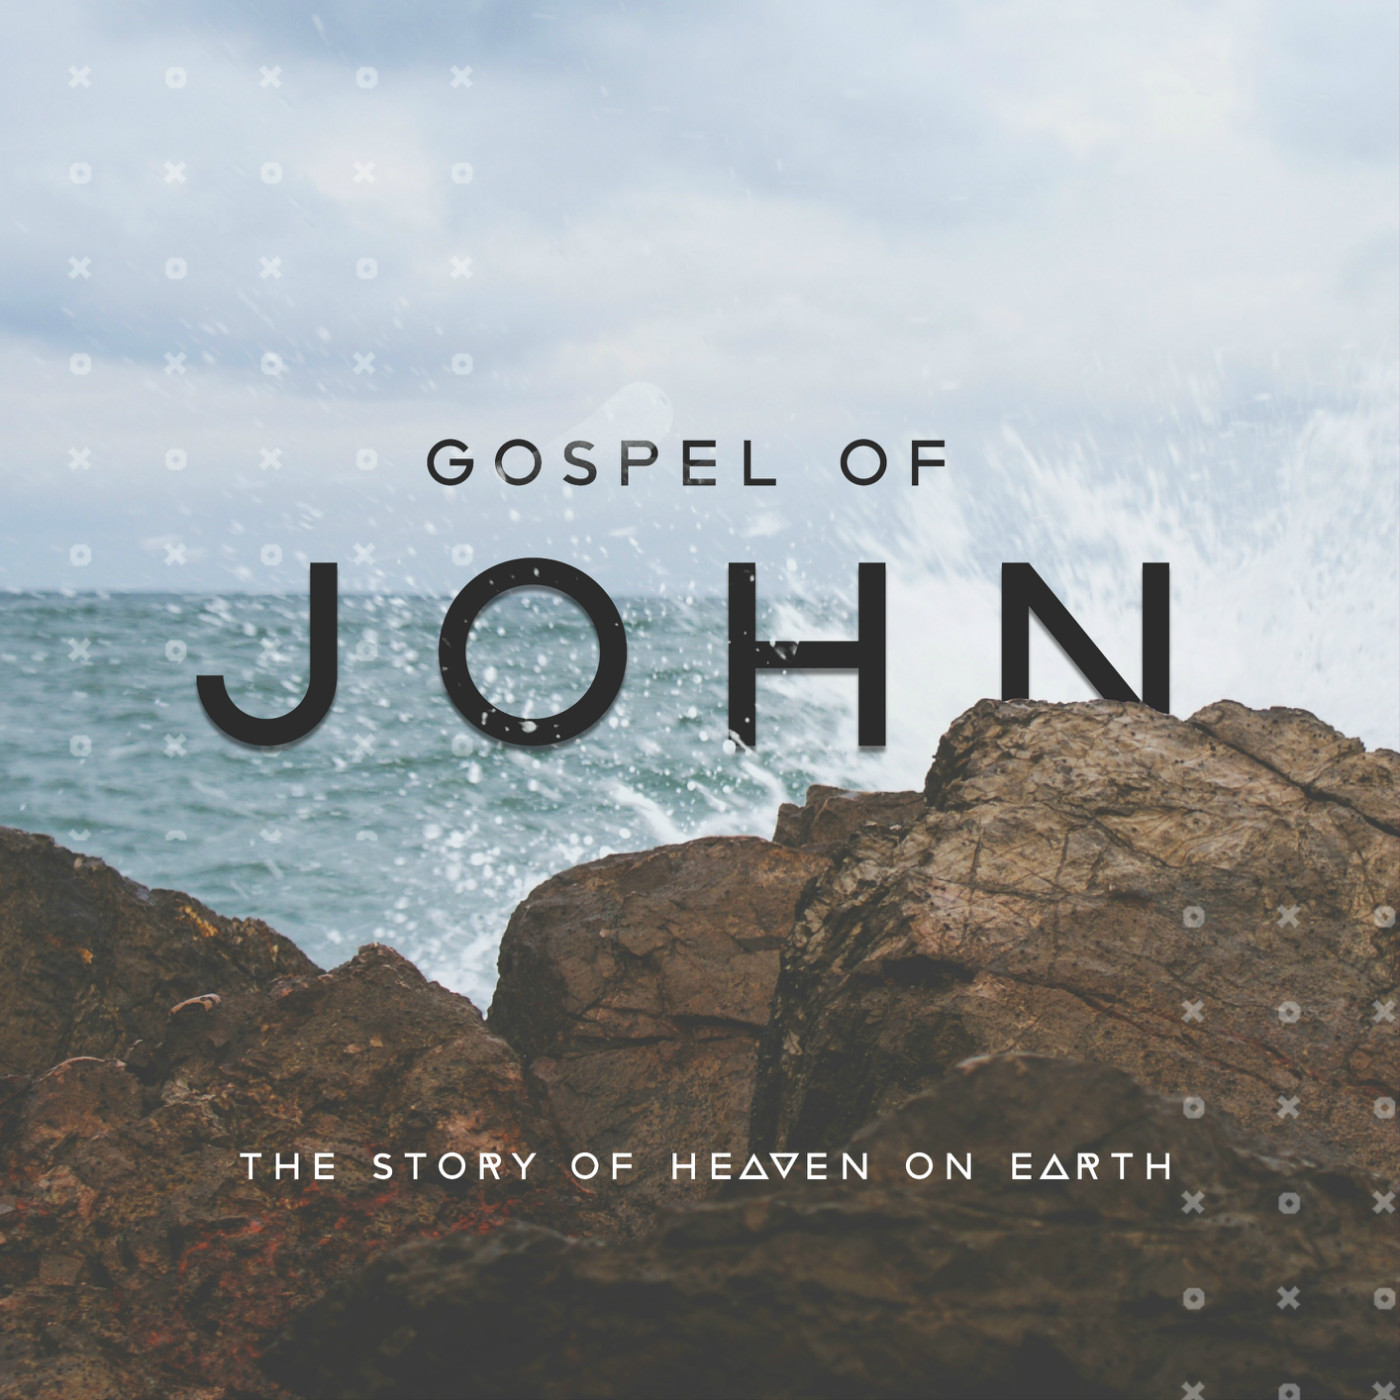 The Gospel of John Series: ”More than the Miracle” Part 8